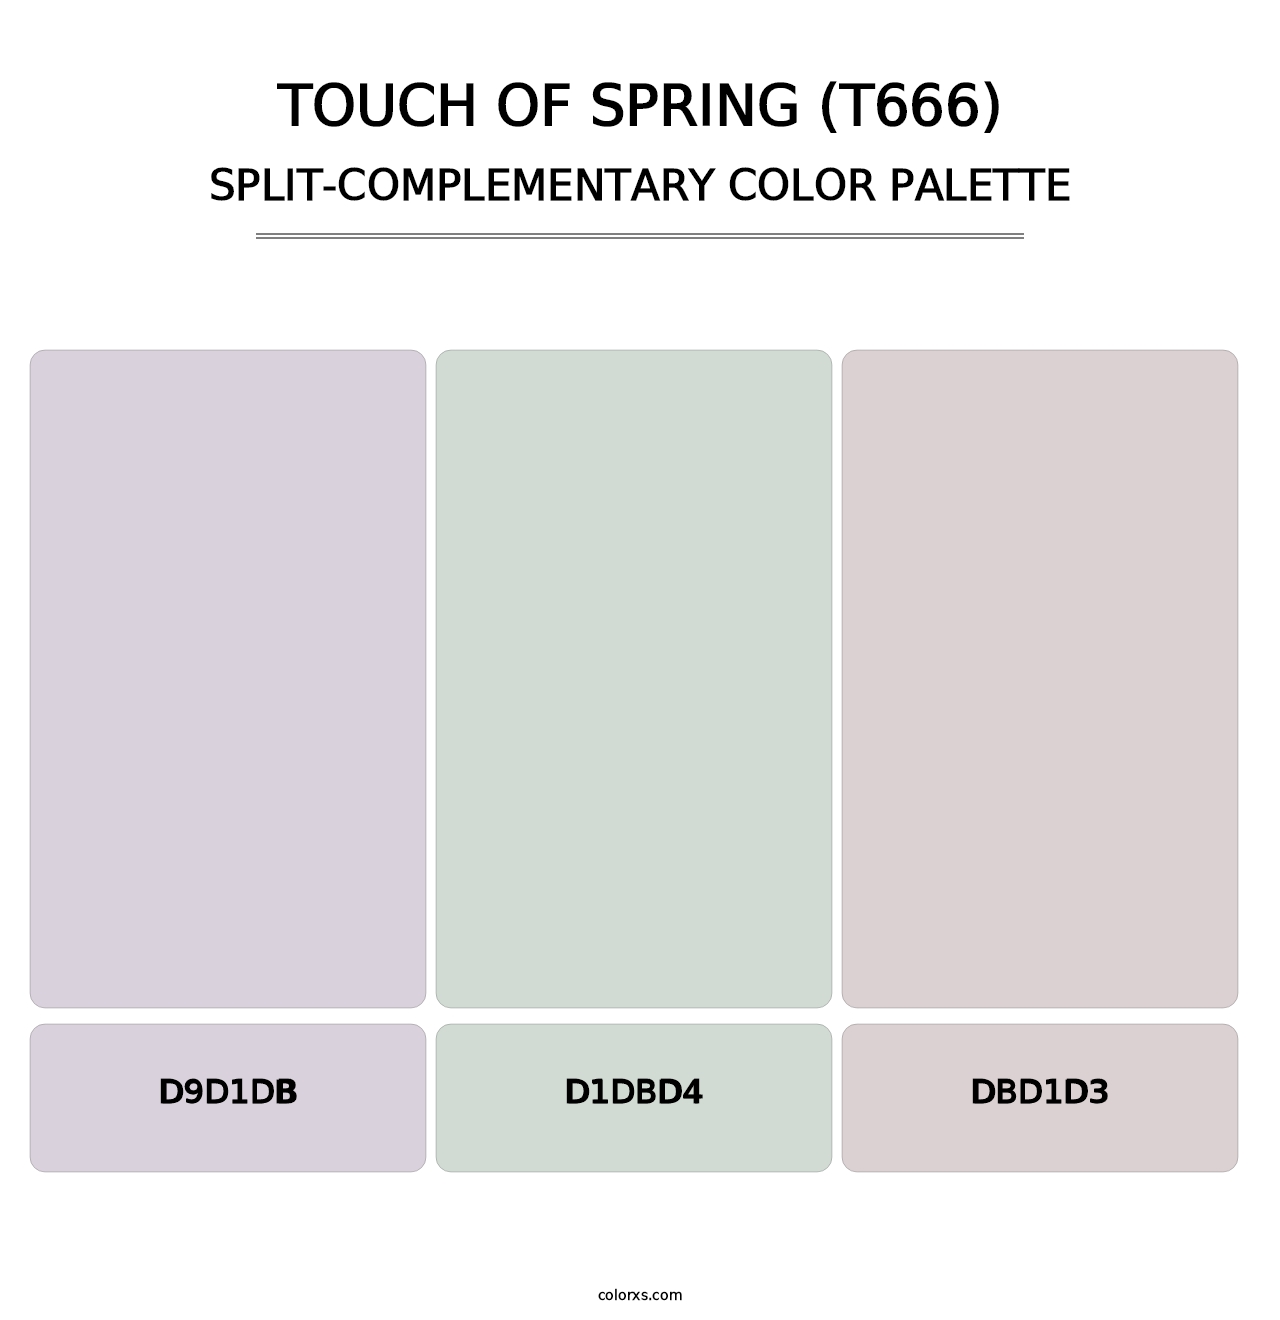 Touch of Spring (T666) - Split-Complementary Color Palette